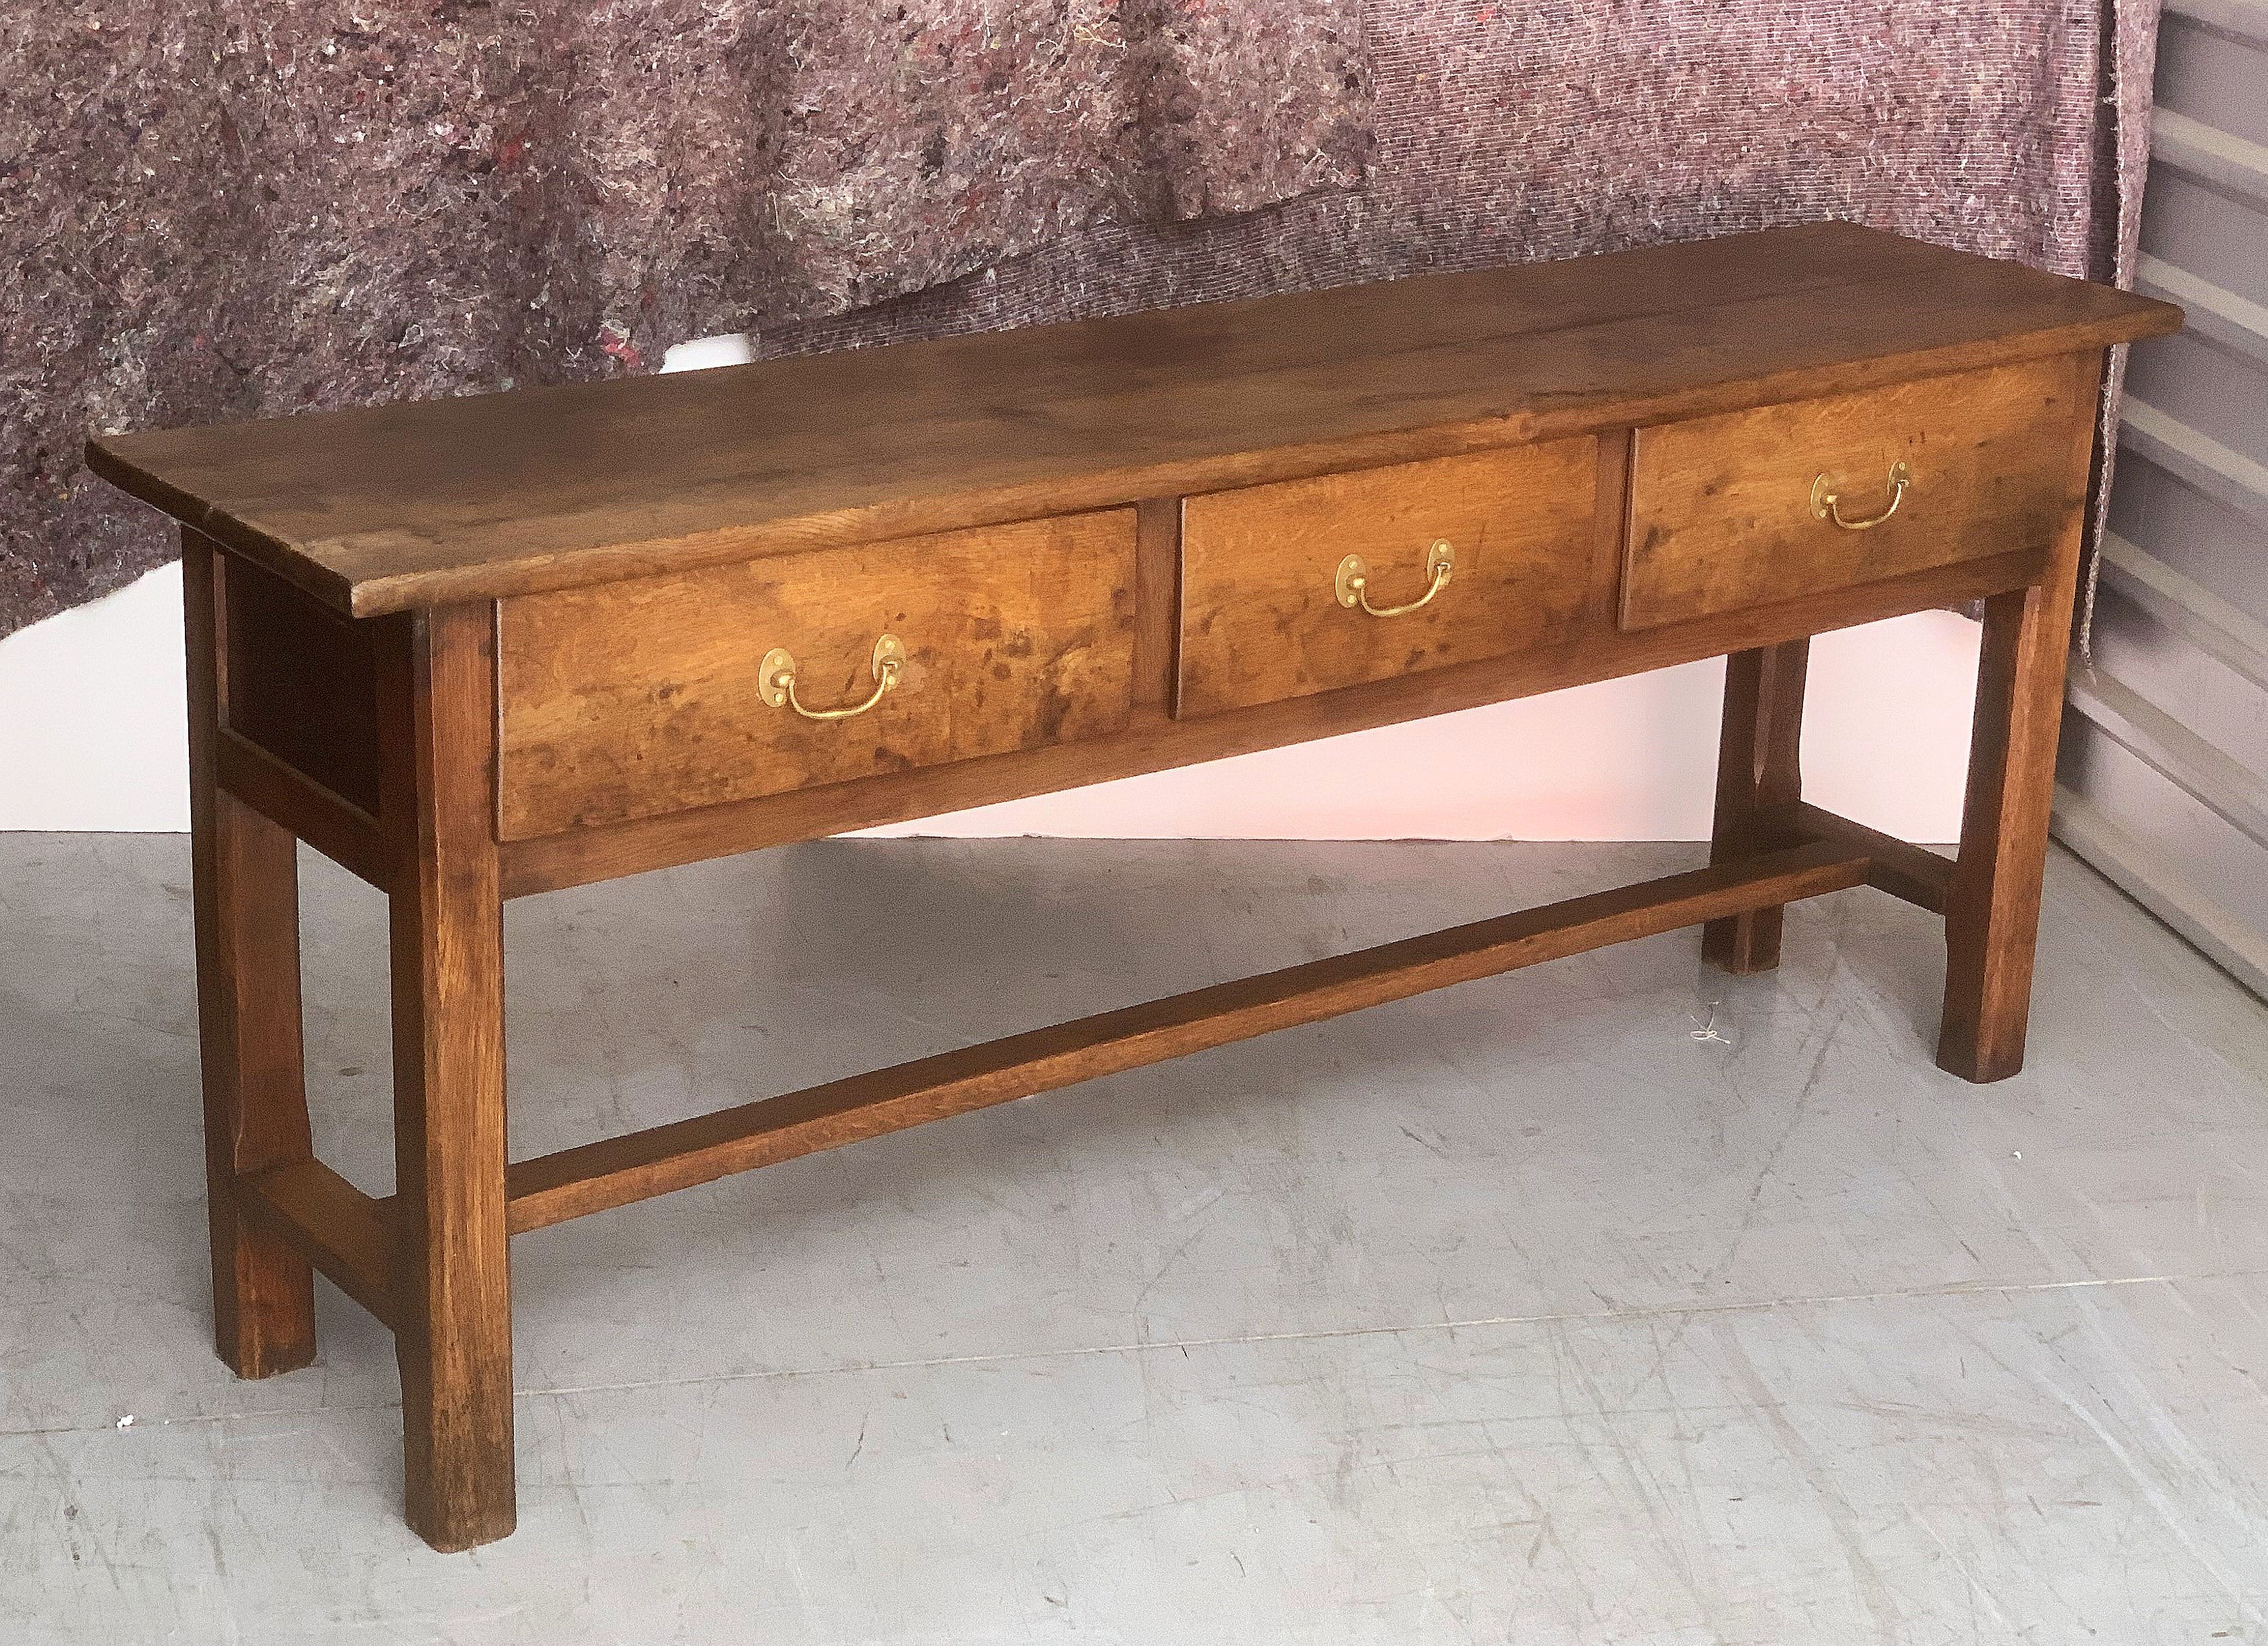 French Provincial French Console Server or Sideboard of Chestnut